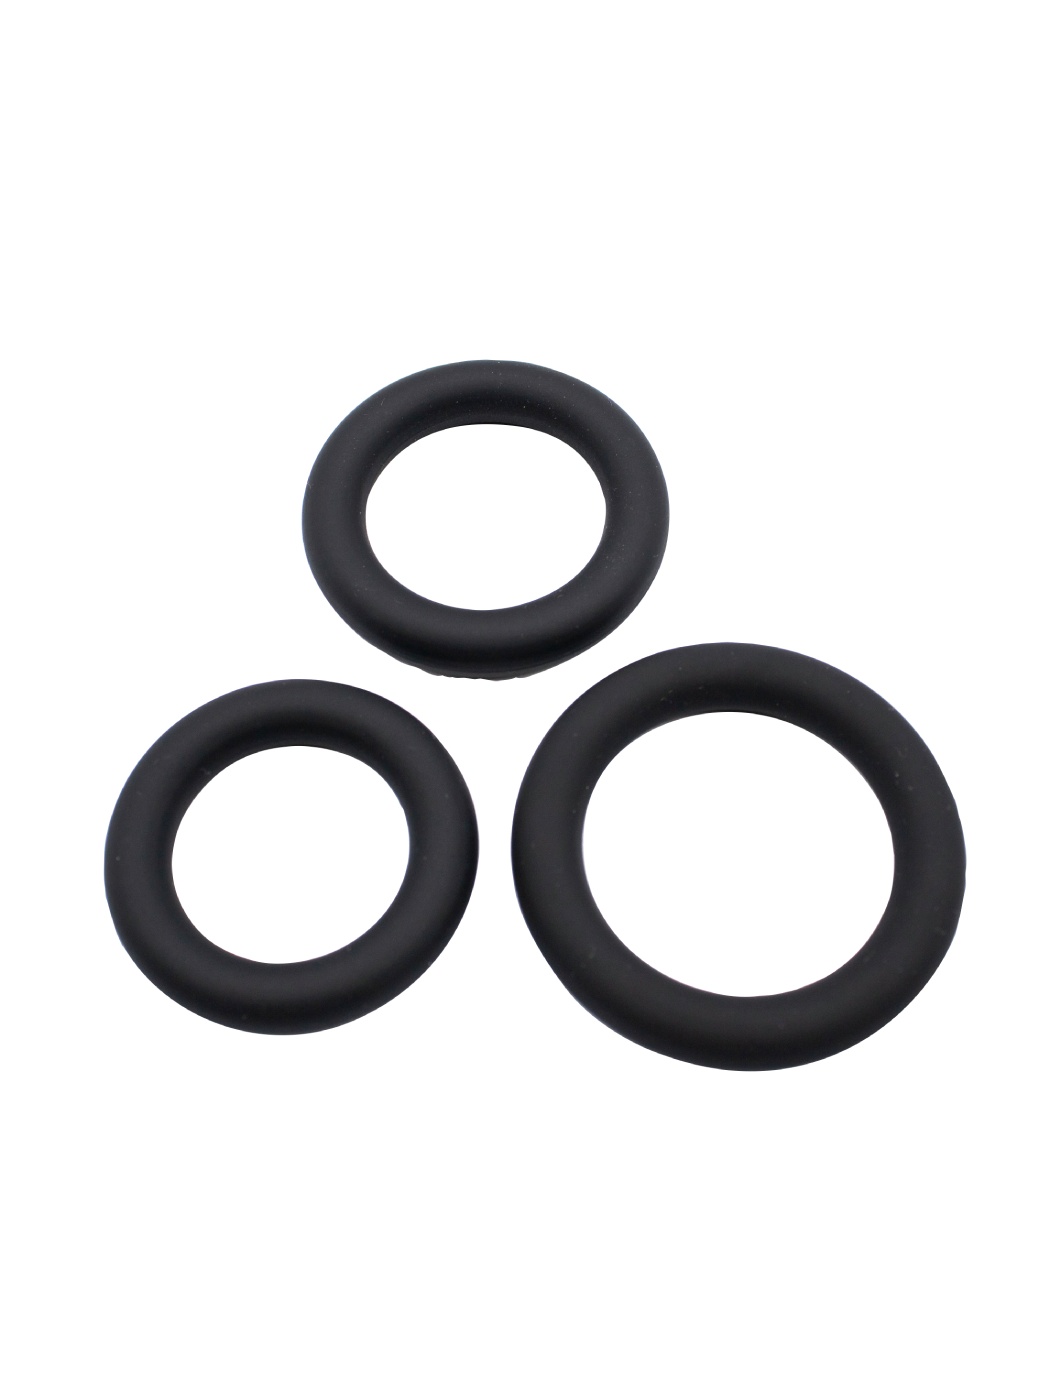 Clenchers Tension Rings 3-Set | Black